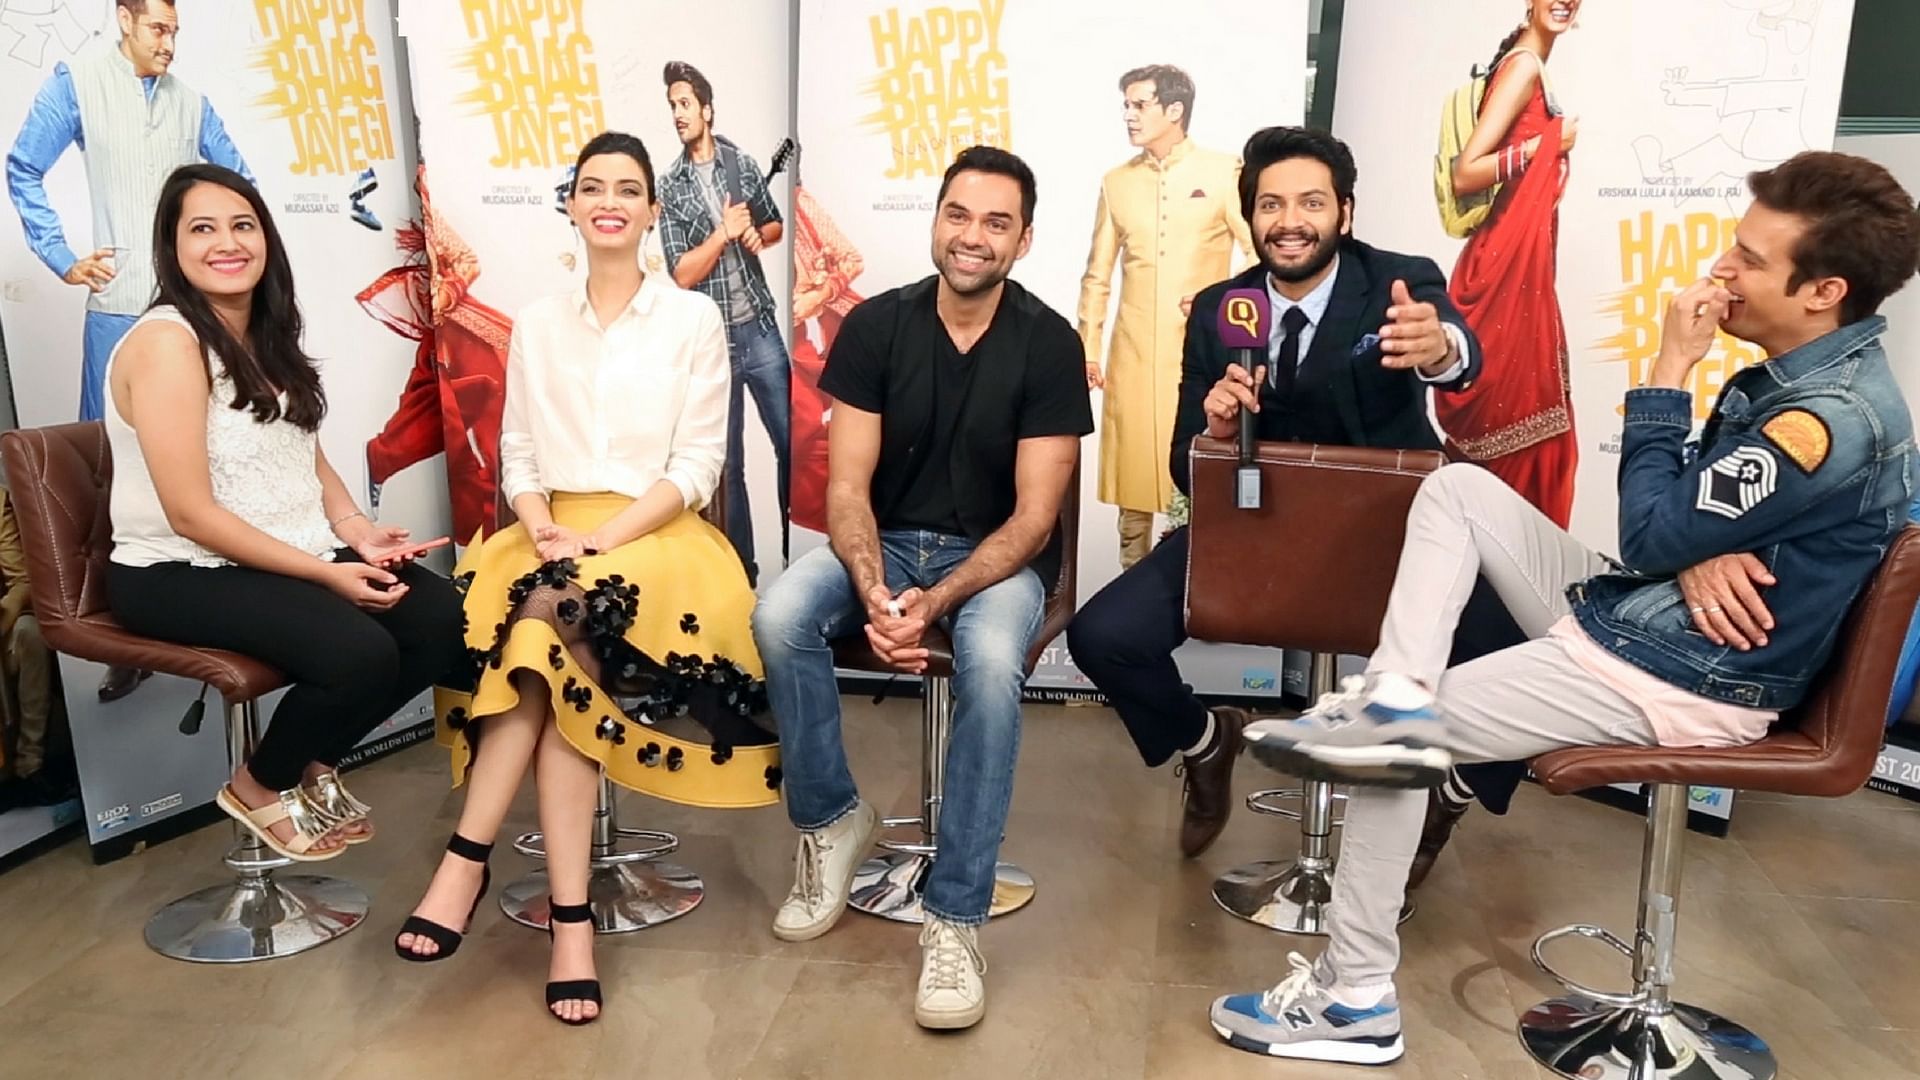 The cast of <i>Happy Bhaag Jayegi </i>talks about the film’s central character Happy being a sadist. (Photo: The Quint)